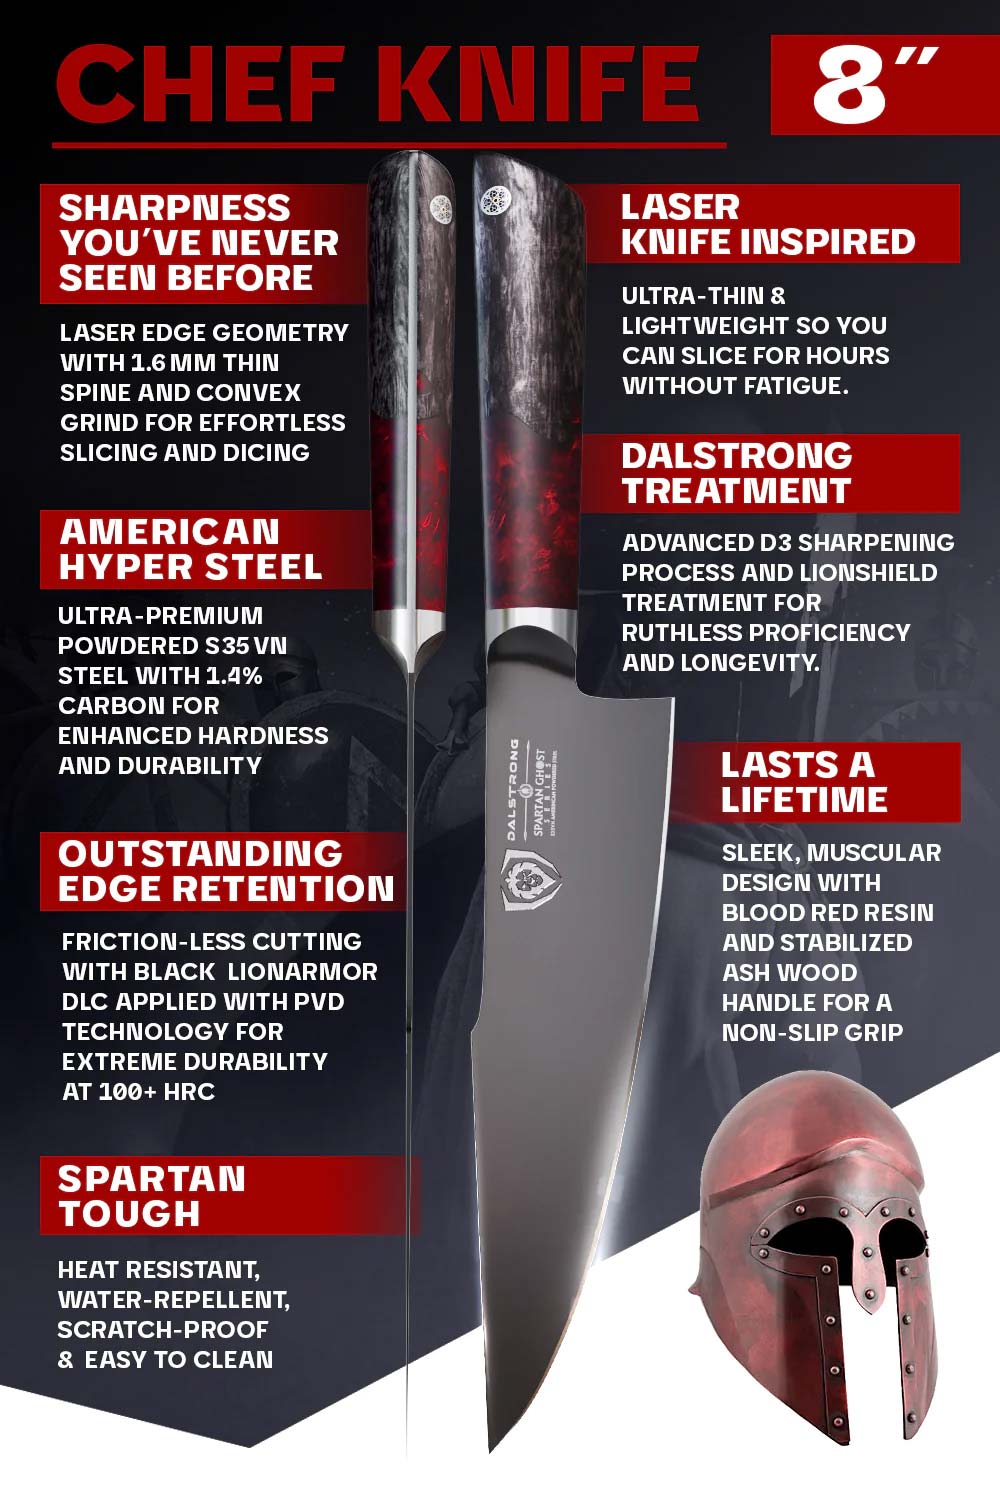 Dalstrong spartan ghost series 8 inch chef knife specification.